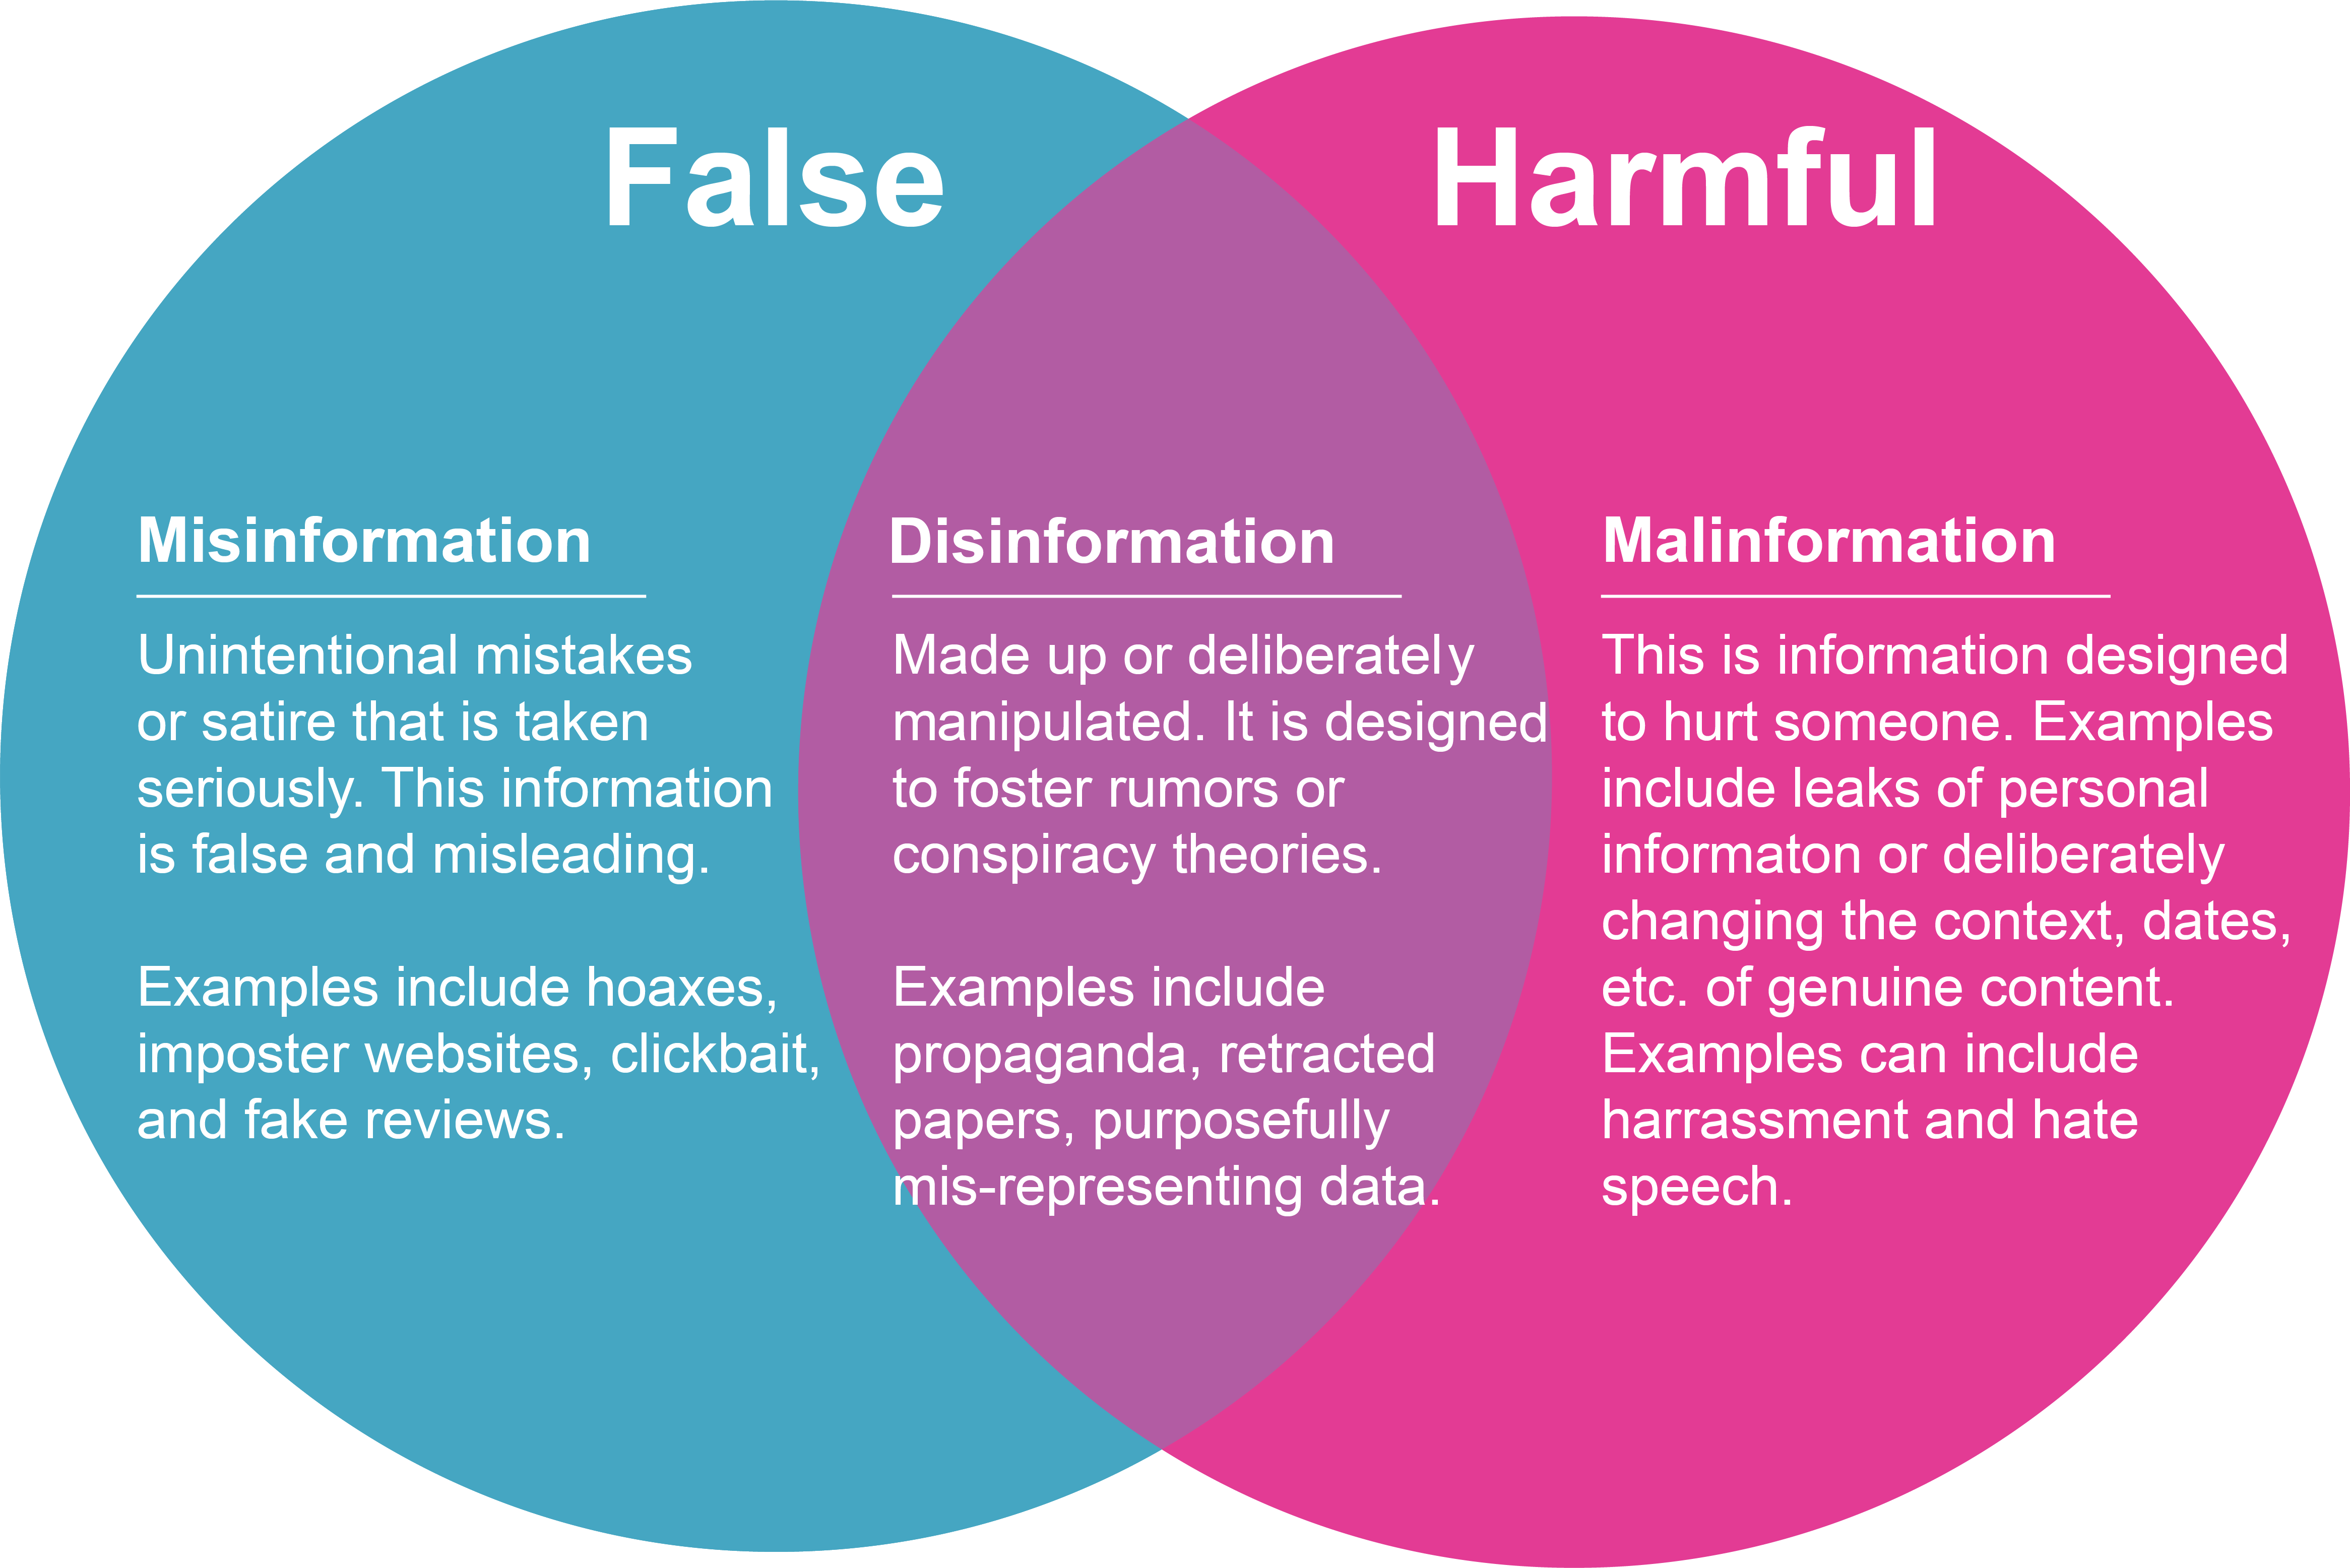 False and harmful vaccine information includes misinformation, or unintentional mistakes or satire that is taken seriously. This information is false and misleading. Examples include hoaxes, imposter websites, clickbait, and fake reviews. Disinformation is made up or deliberately manipulated. It is designed to foster rumors or conspiracy theories. Examples include propaganda, retracted papers, purposefully mis-representing data. Malinformation is informatin designed to hurt someone. Examples include leaks of personal information, deliberately changing the context, dates, etc. of genuine content. Examples can influde harassment and hate speech.